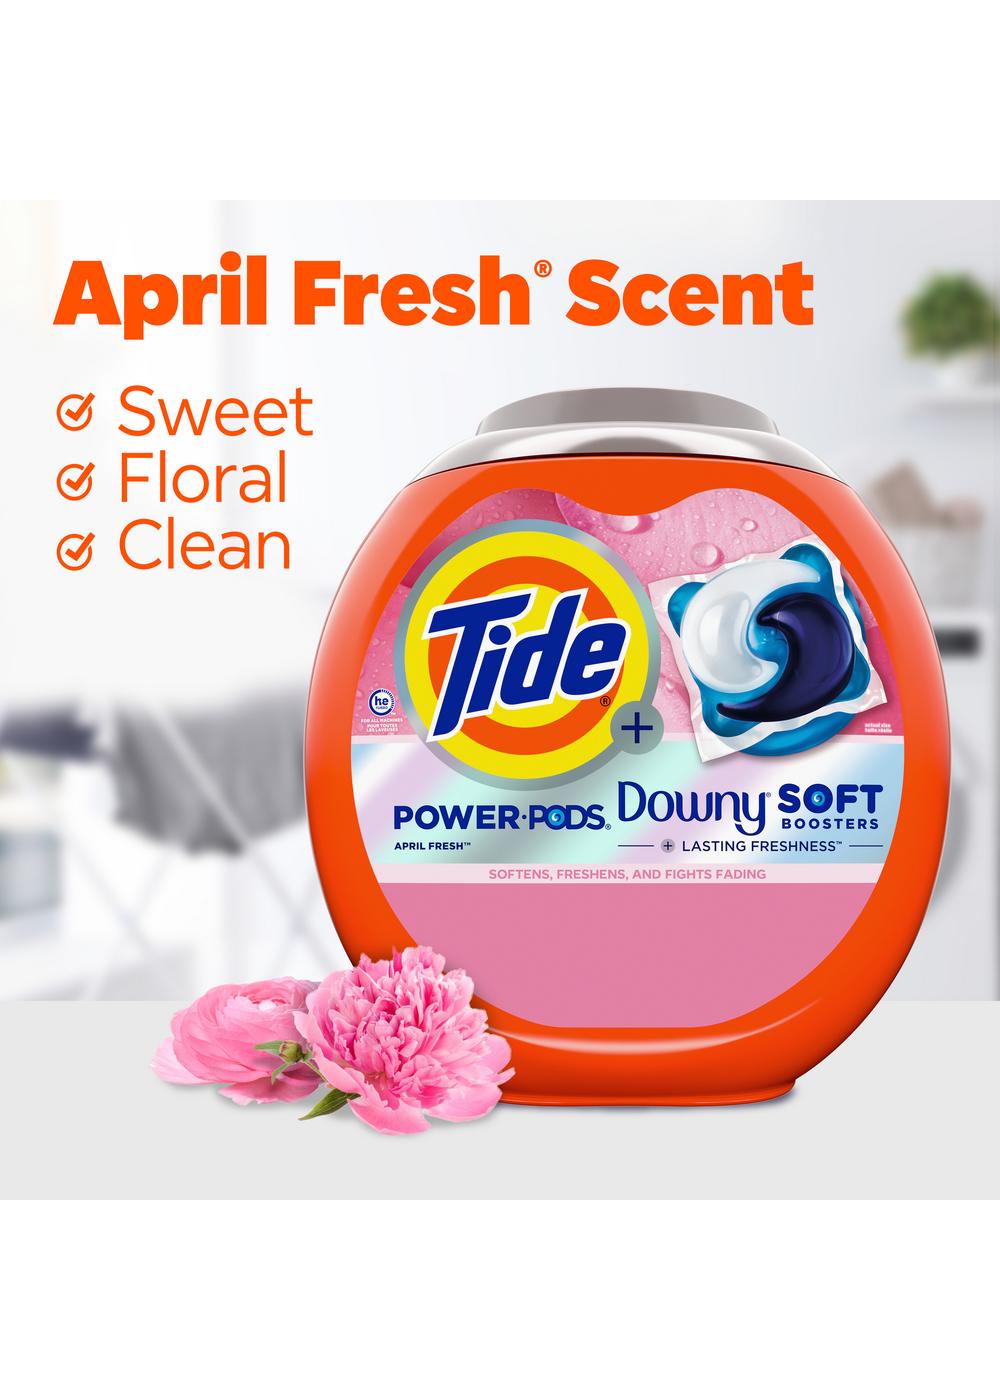 Tide Power Pods + Downy Soft Boosters HE Laundry Detergent - April Fresh; image 3 of 7